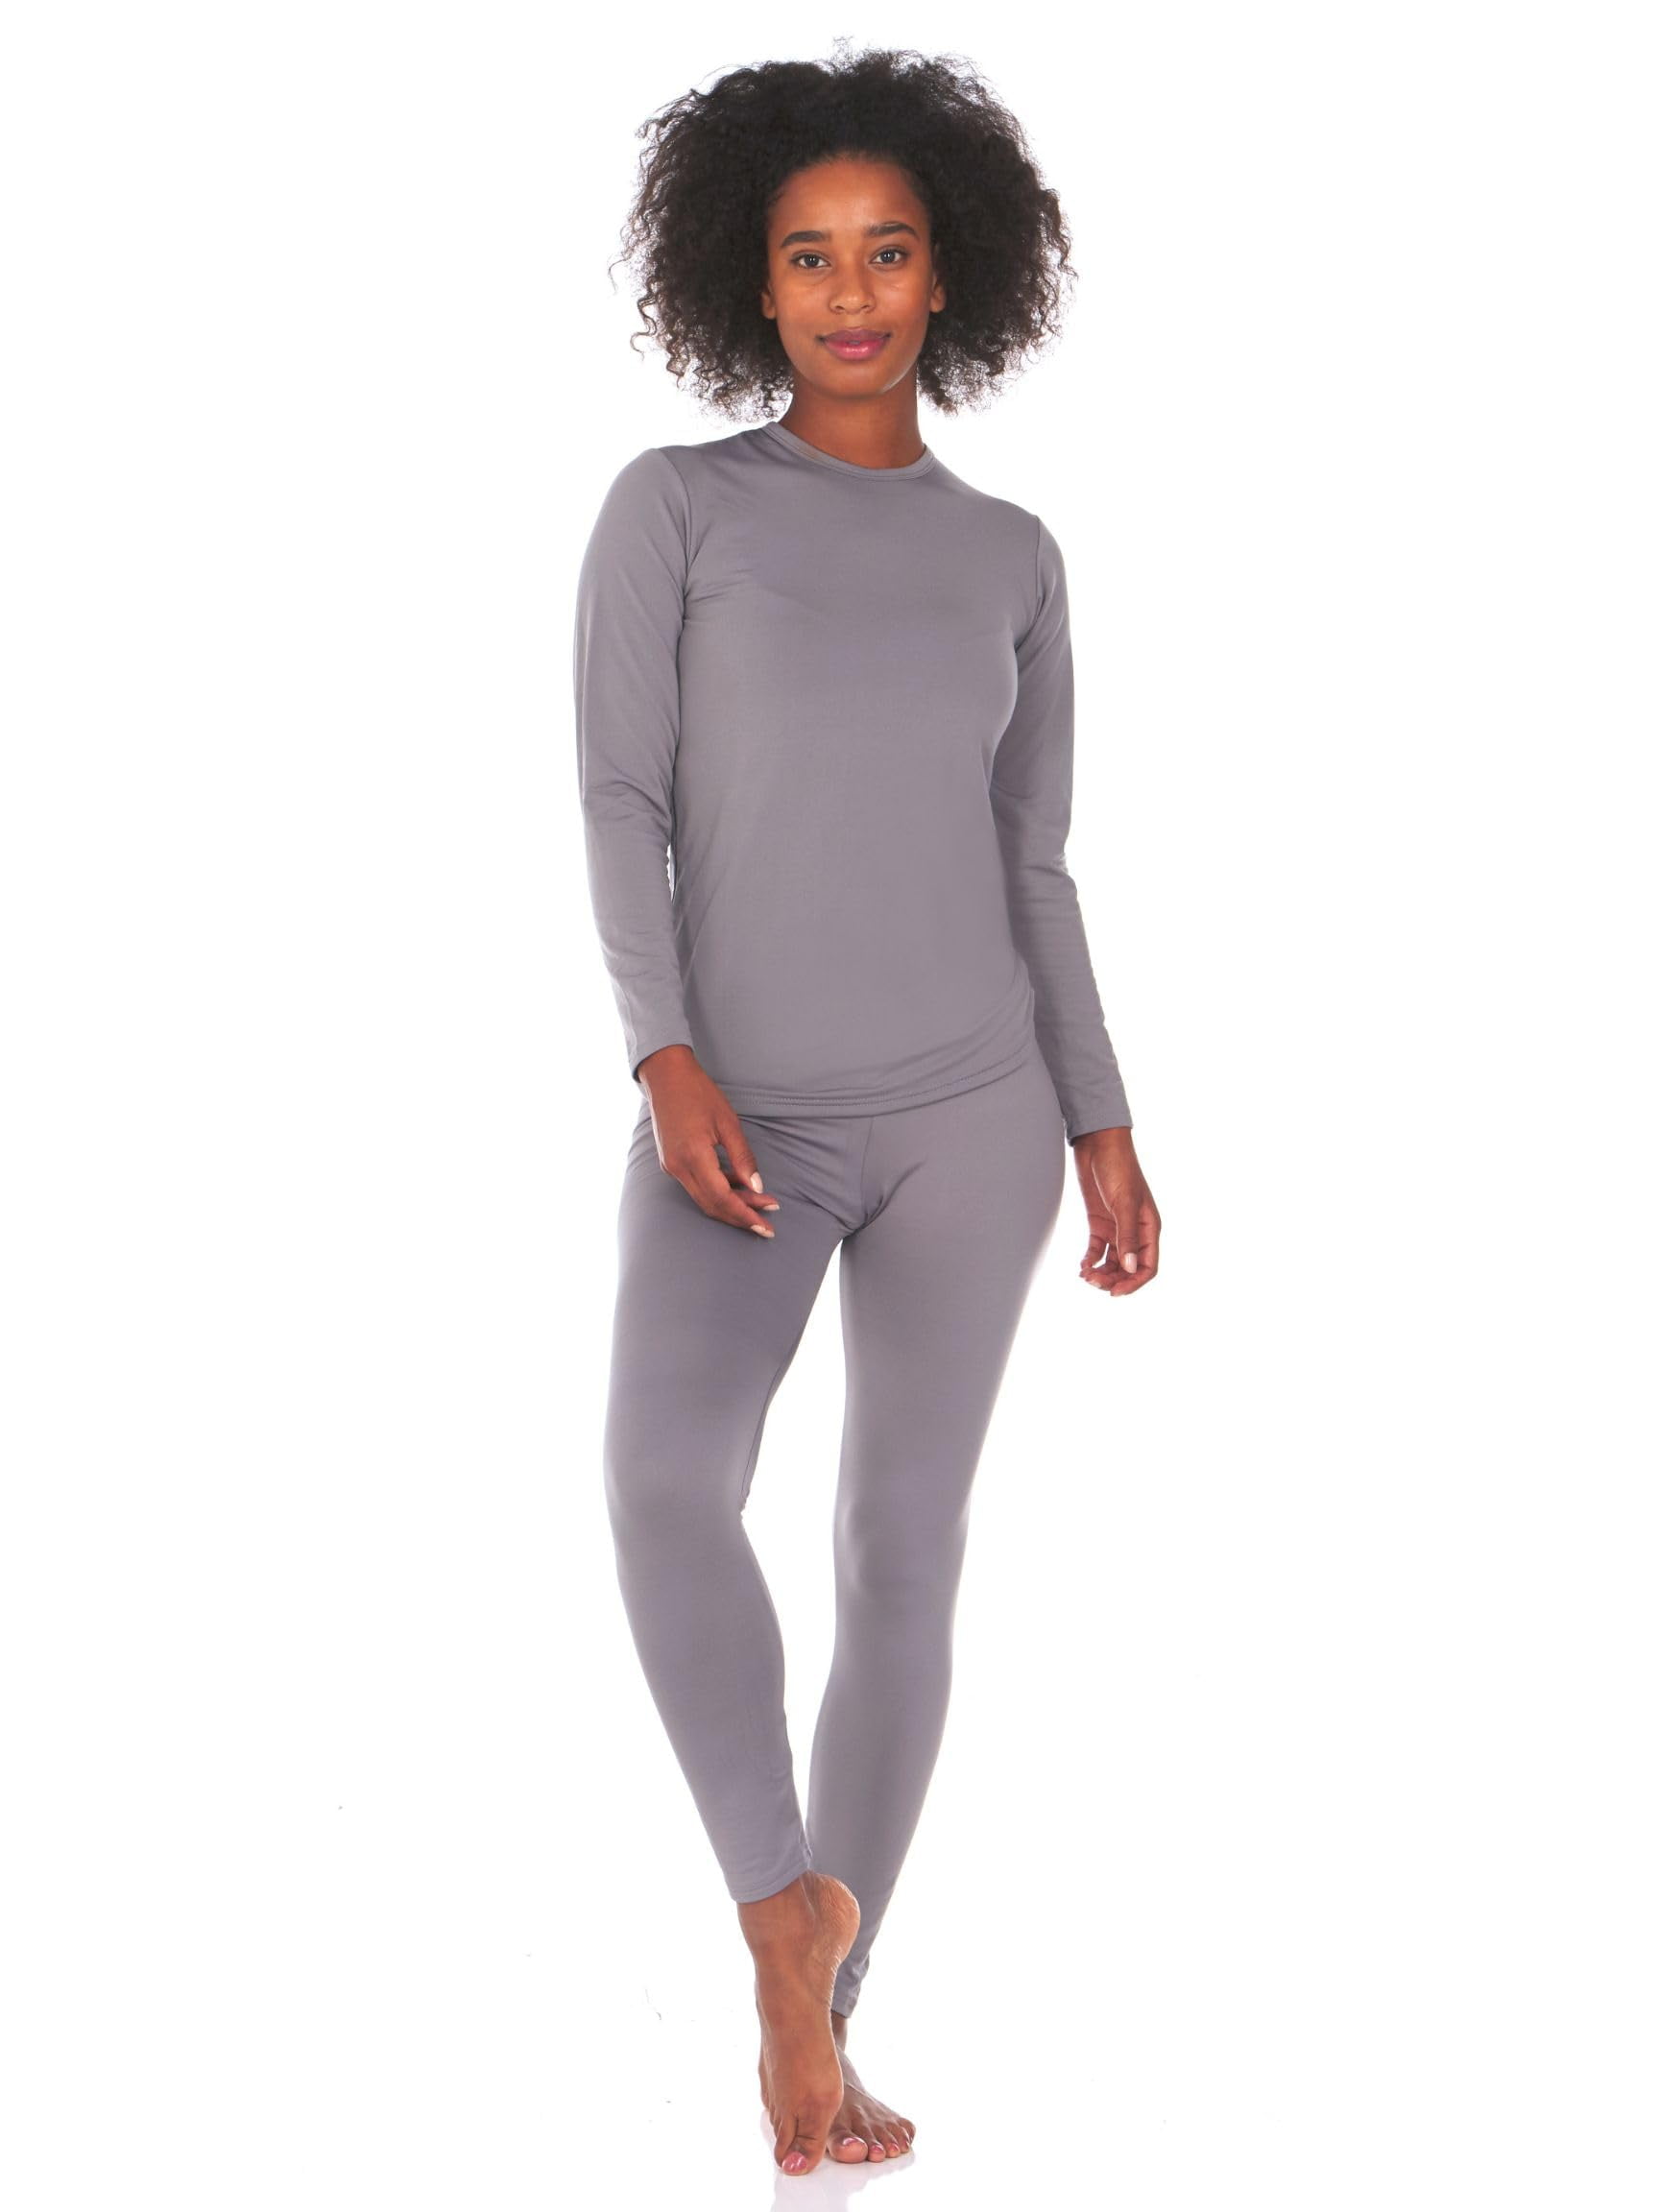 warm women's long johns - OFF-59% >Free Delivery